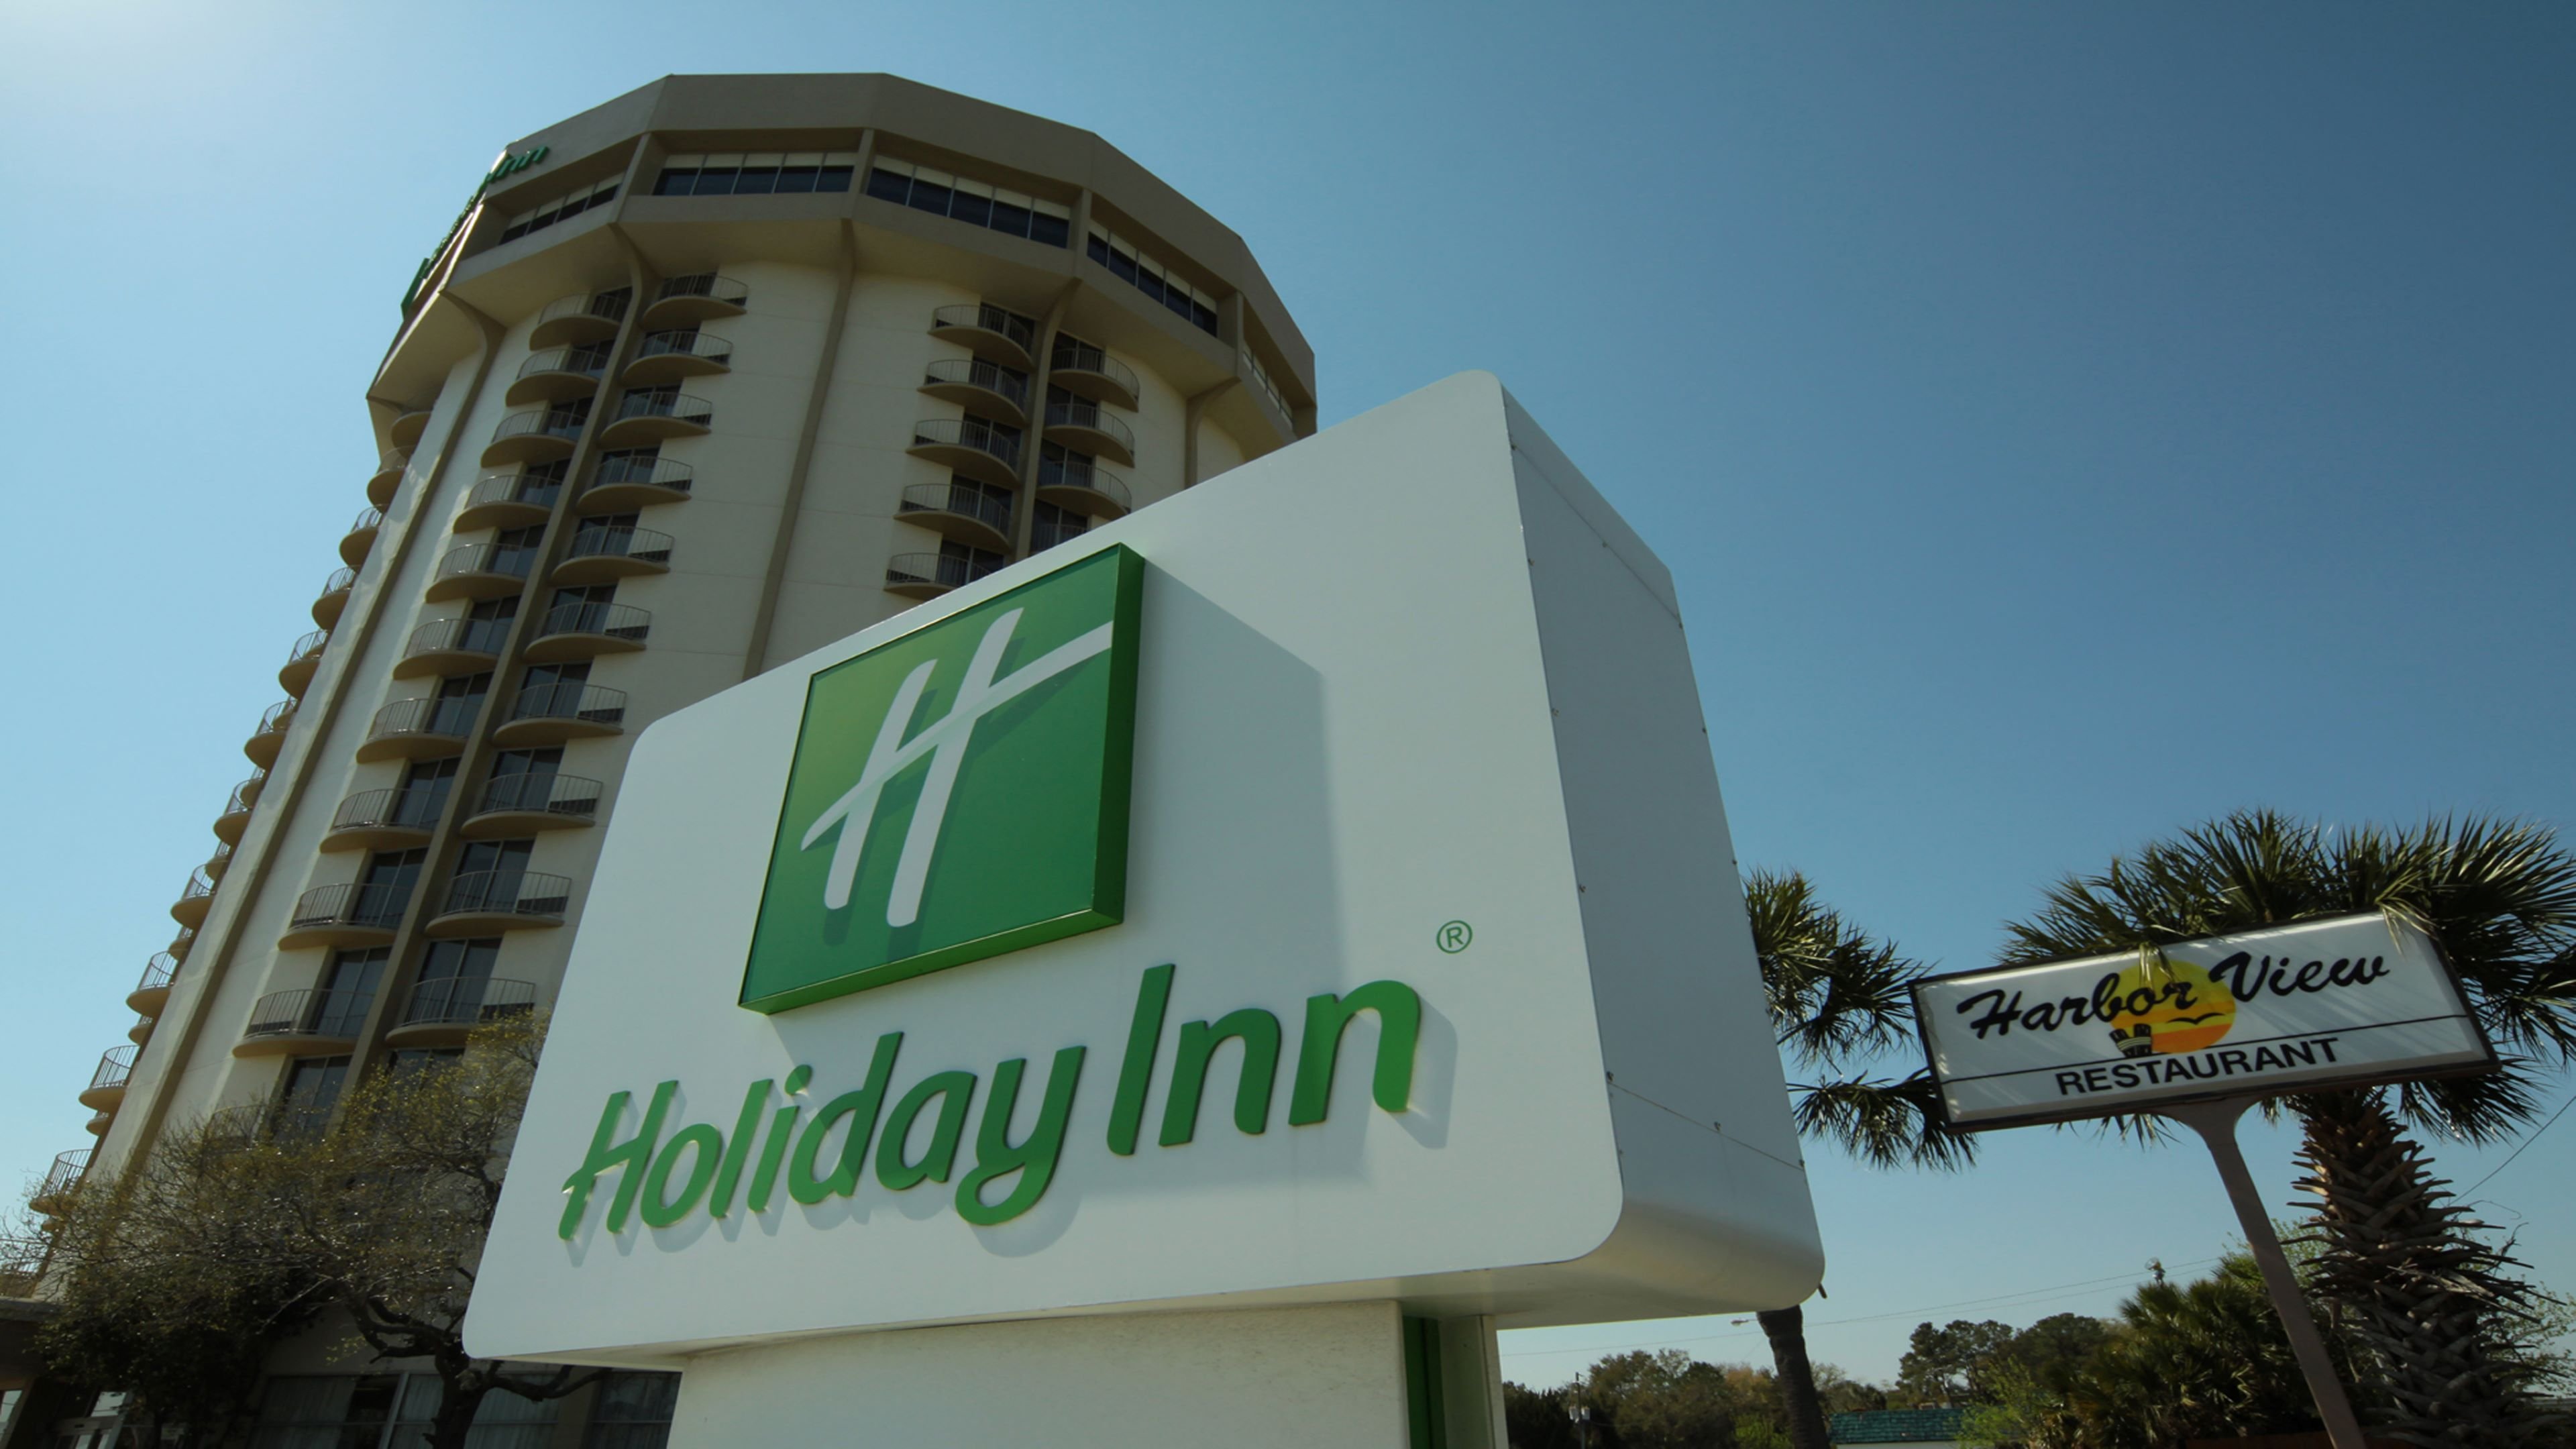 Stay with Holiday Inn Charleston-Riverview!